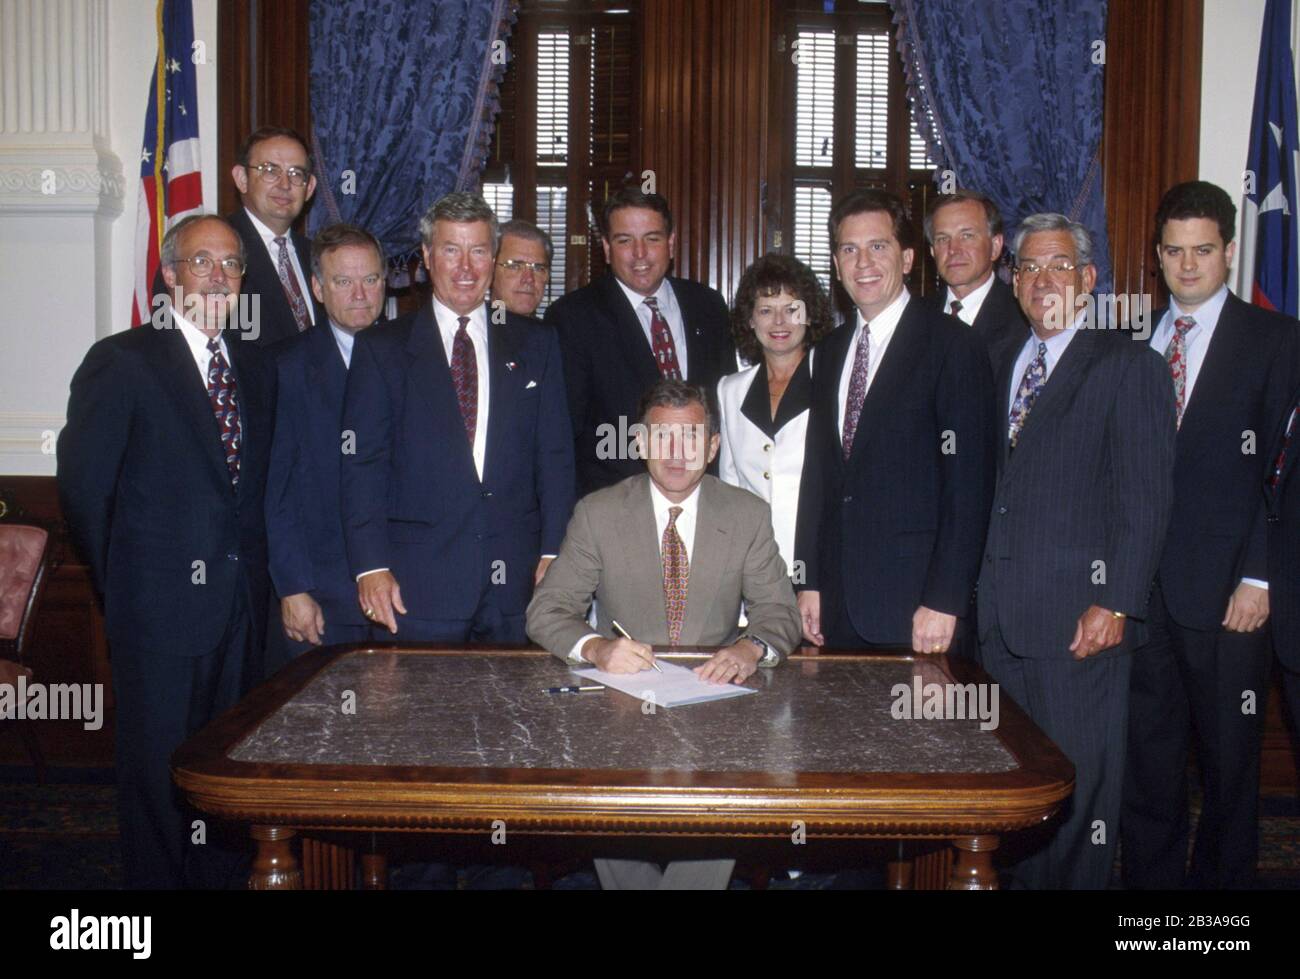 Austin, Texas USA, June 29, 1995: Members of the Texas Association of Realtors surround Texas Governor George W. Bush during a bill-signing ceremony in the governor's office at the Texas Capitol. ©Bob Daemmrich Stock Photo